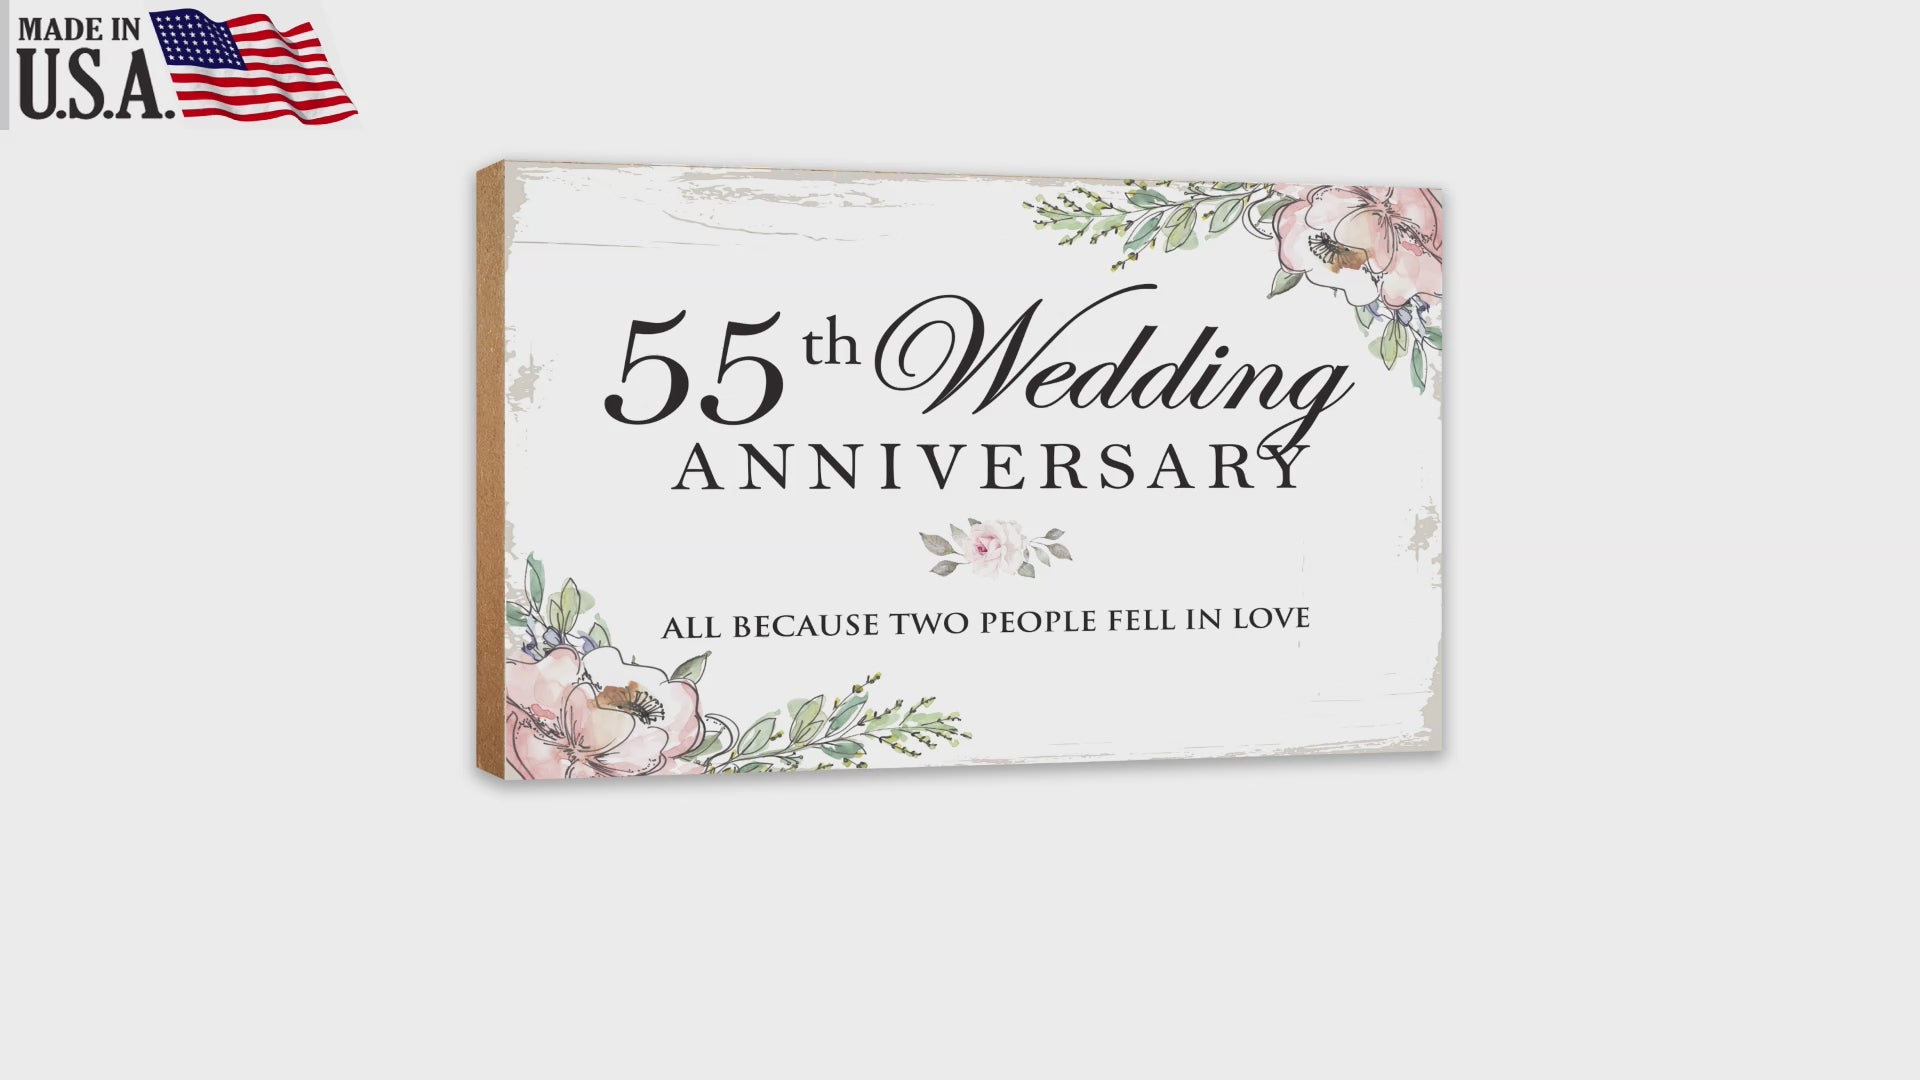 55th Wedding Anniversary Unique Shelf Decor and Tabletop Signs Gifts for Couples - Fell In Love